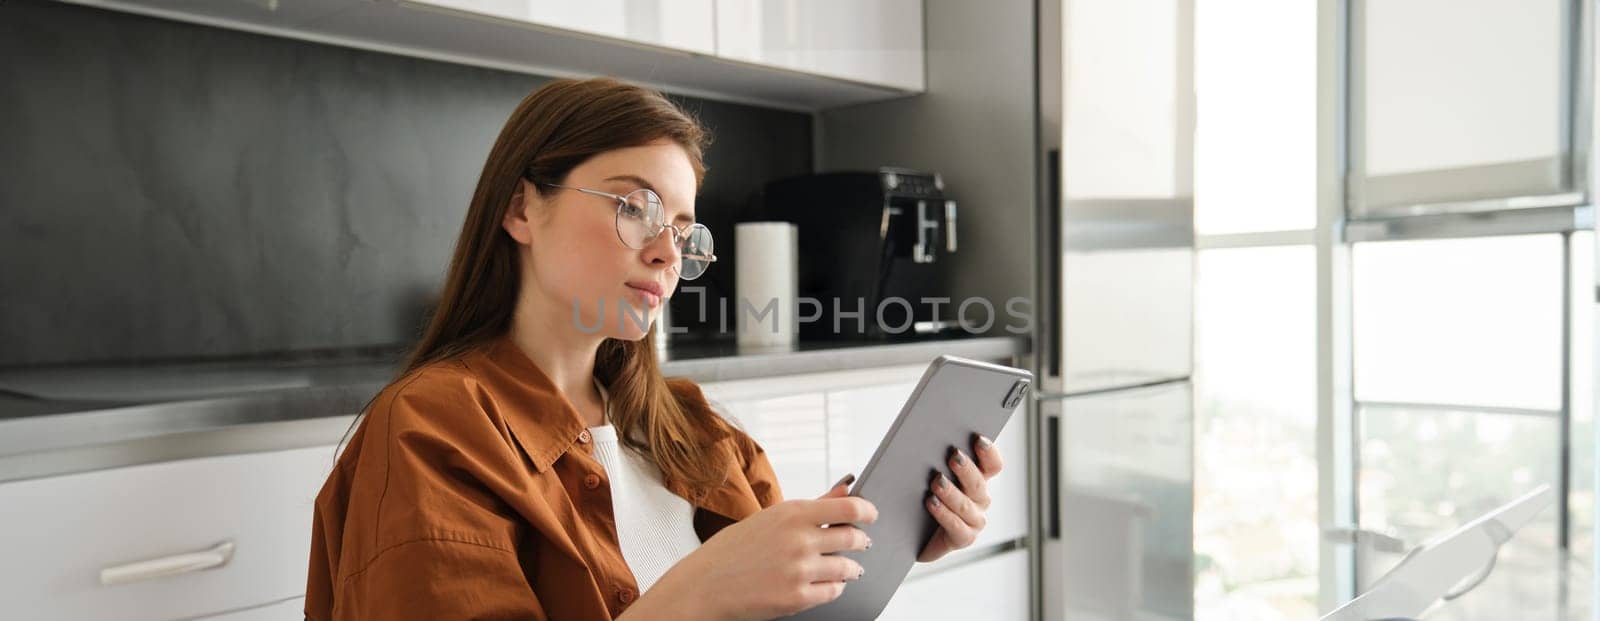 Home and leisure concept. Portrait of beautiful young woman reading on digital tablet, sitting in kitchen, working on remote.